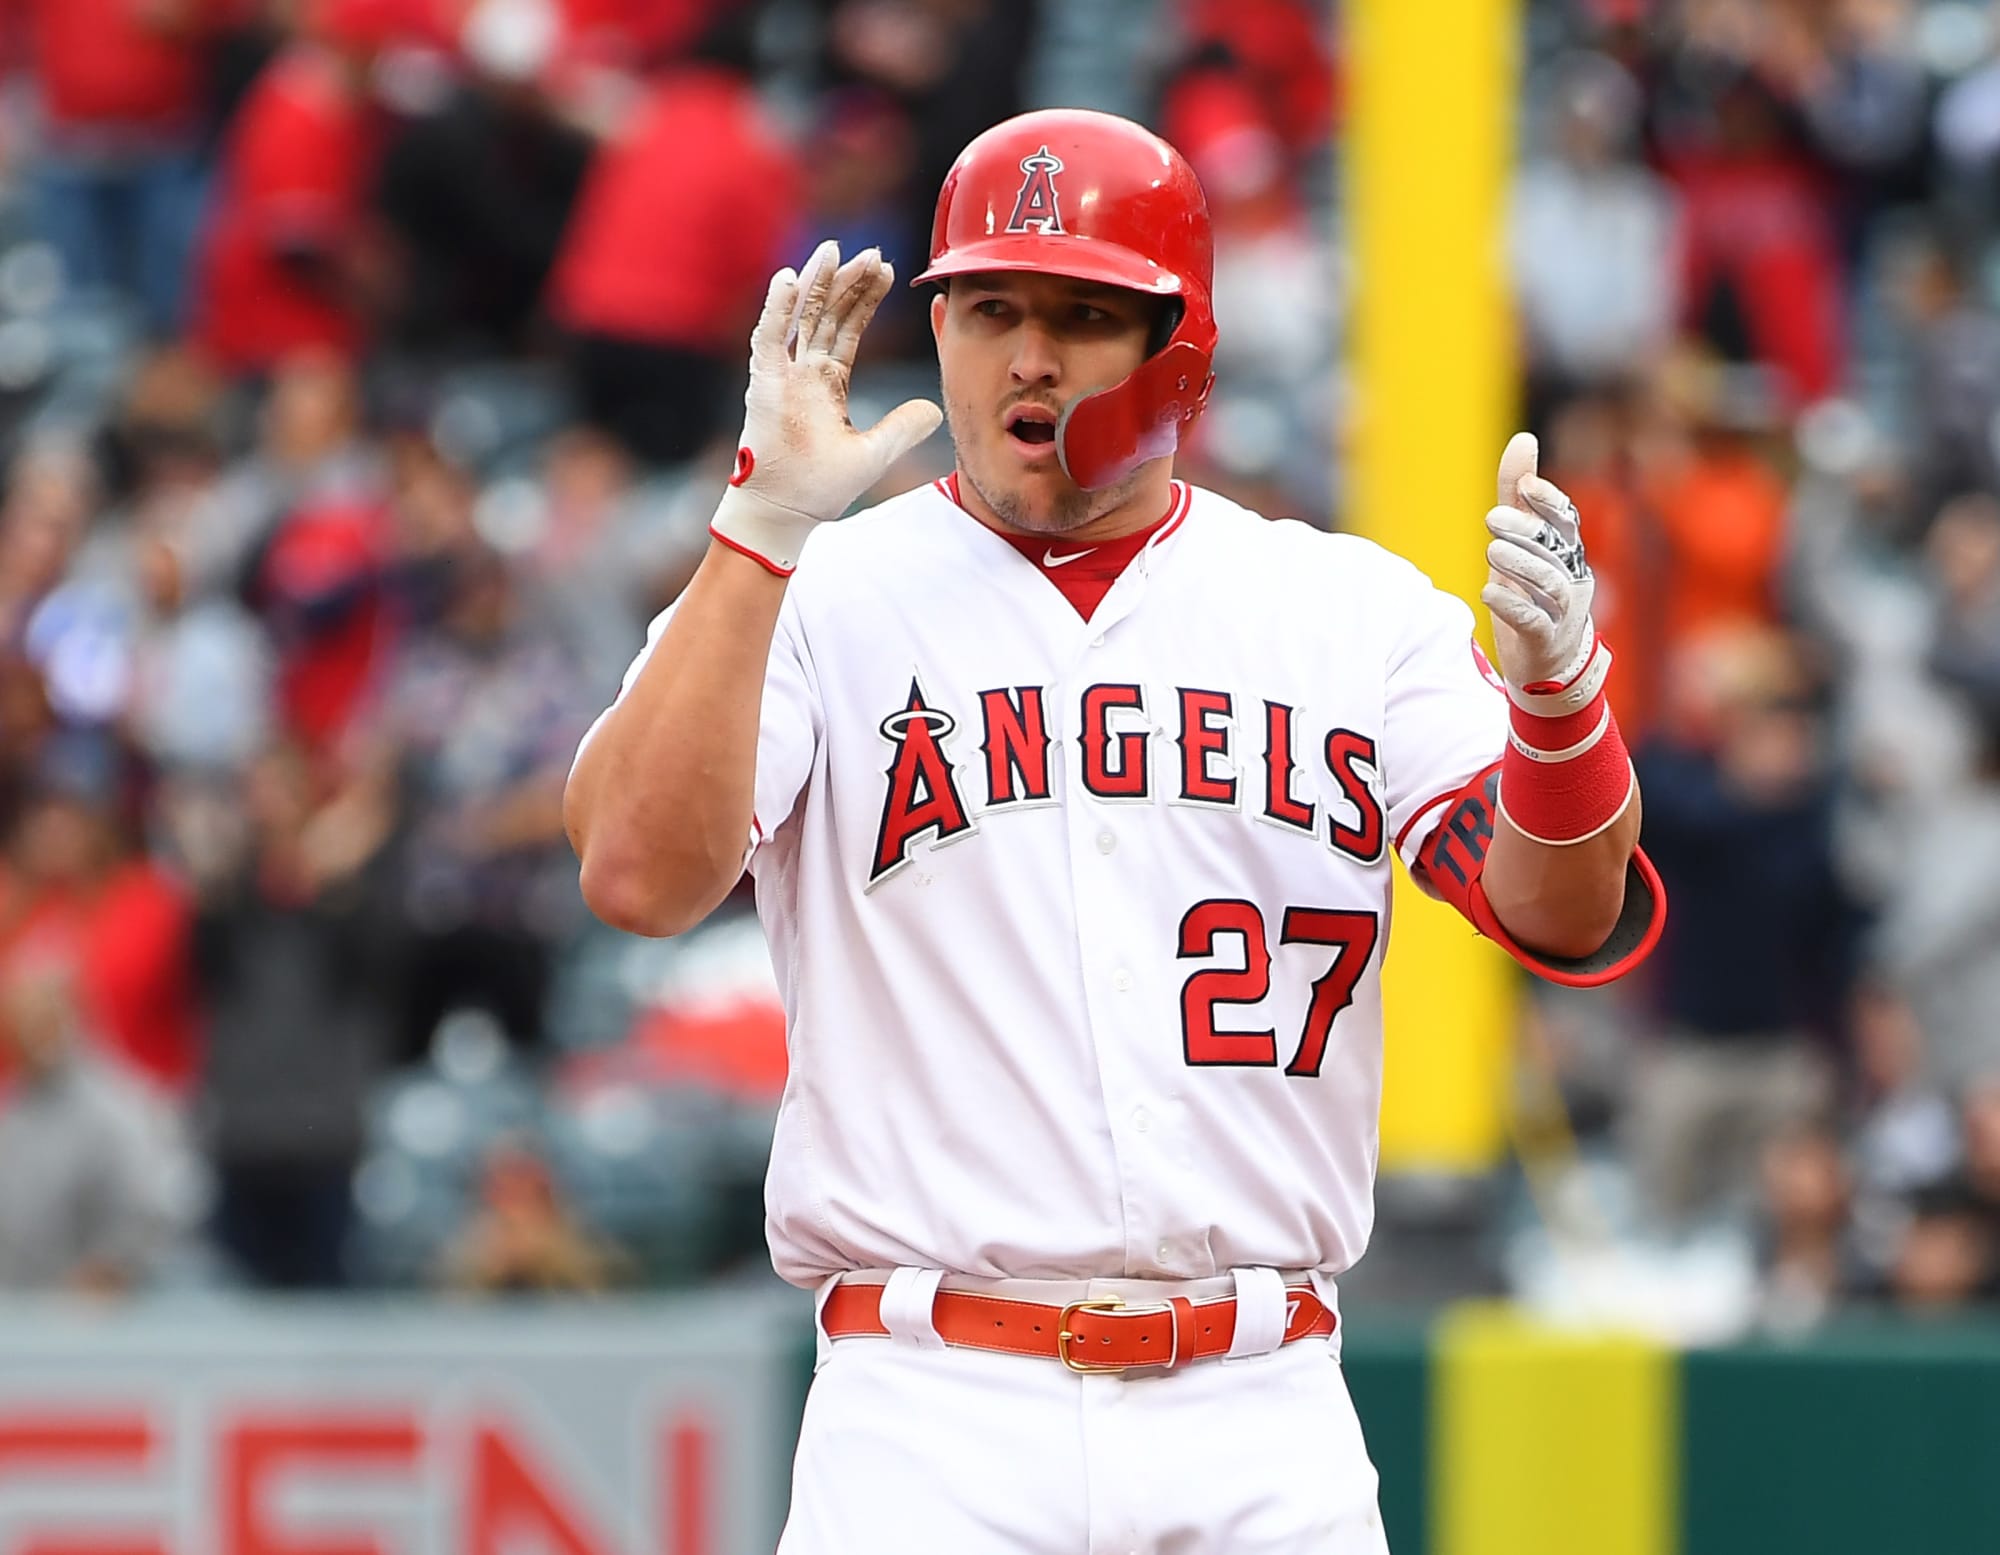 Los Angeles Angels have literally zero percent chance to win World Series